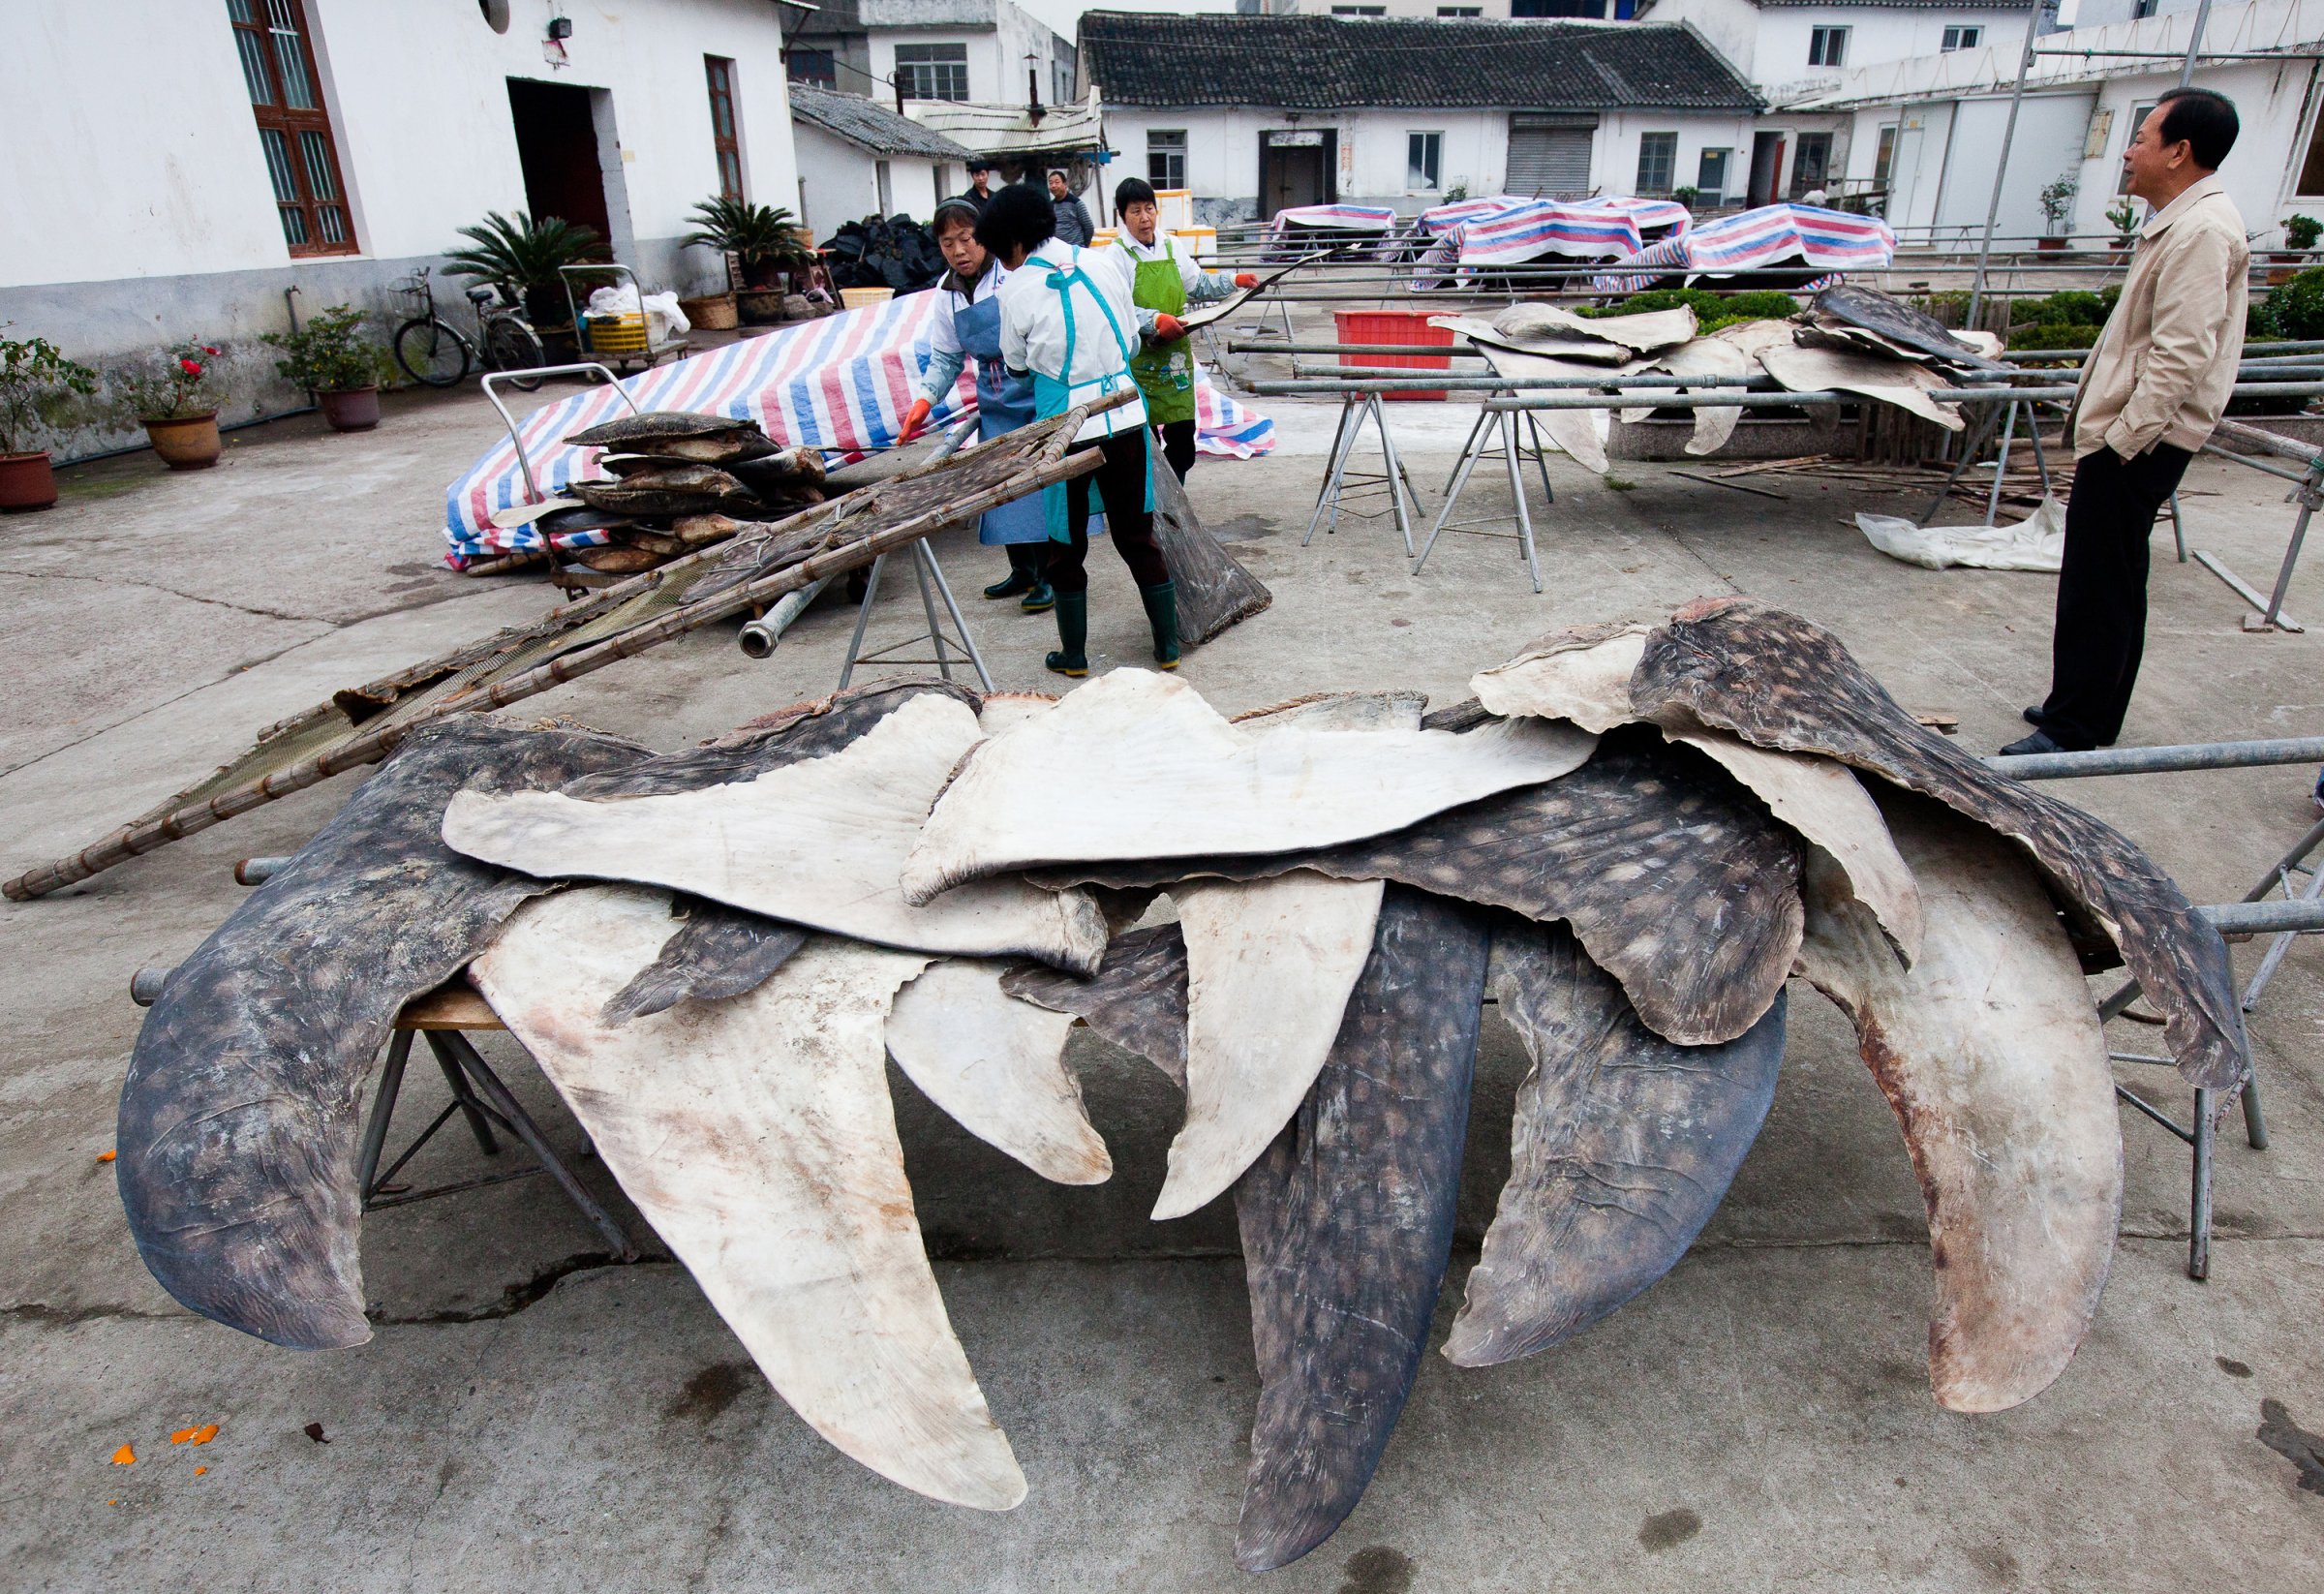 Whale shark fins are dried and stacked for export. This processing plant processes over 600 whale sharks per year.Puqi, Zhejiang Province, China. Photo: WildLife Risk  (HAND OUT PHOTO ONLY, NO ARCHIVES )